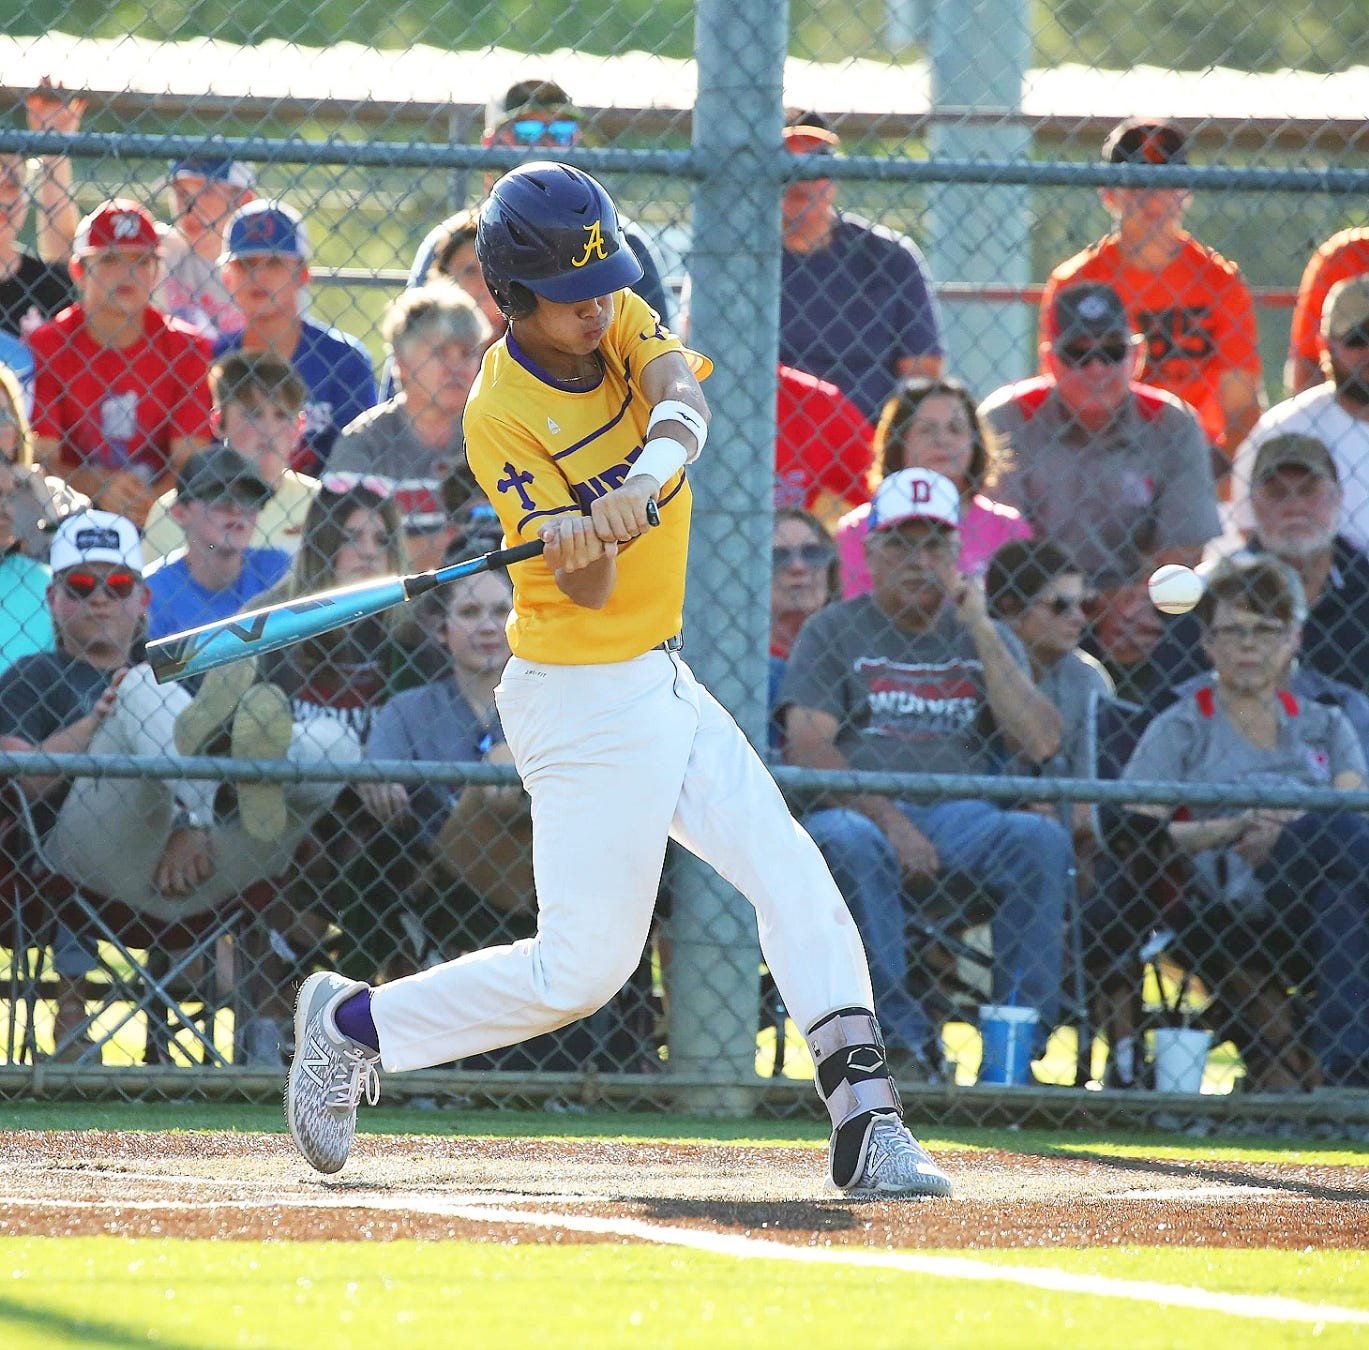 Anacoco's Reid Rodriguez had a double, a homer and four RBIs as the Indians blasted the Weston Wolves in the Class B quarterfinals on Saturday.